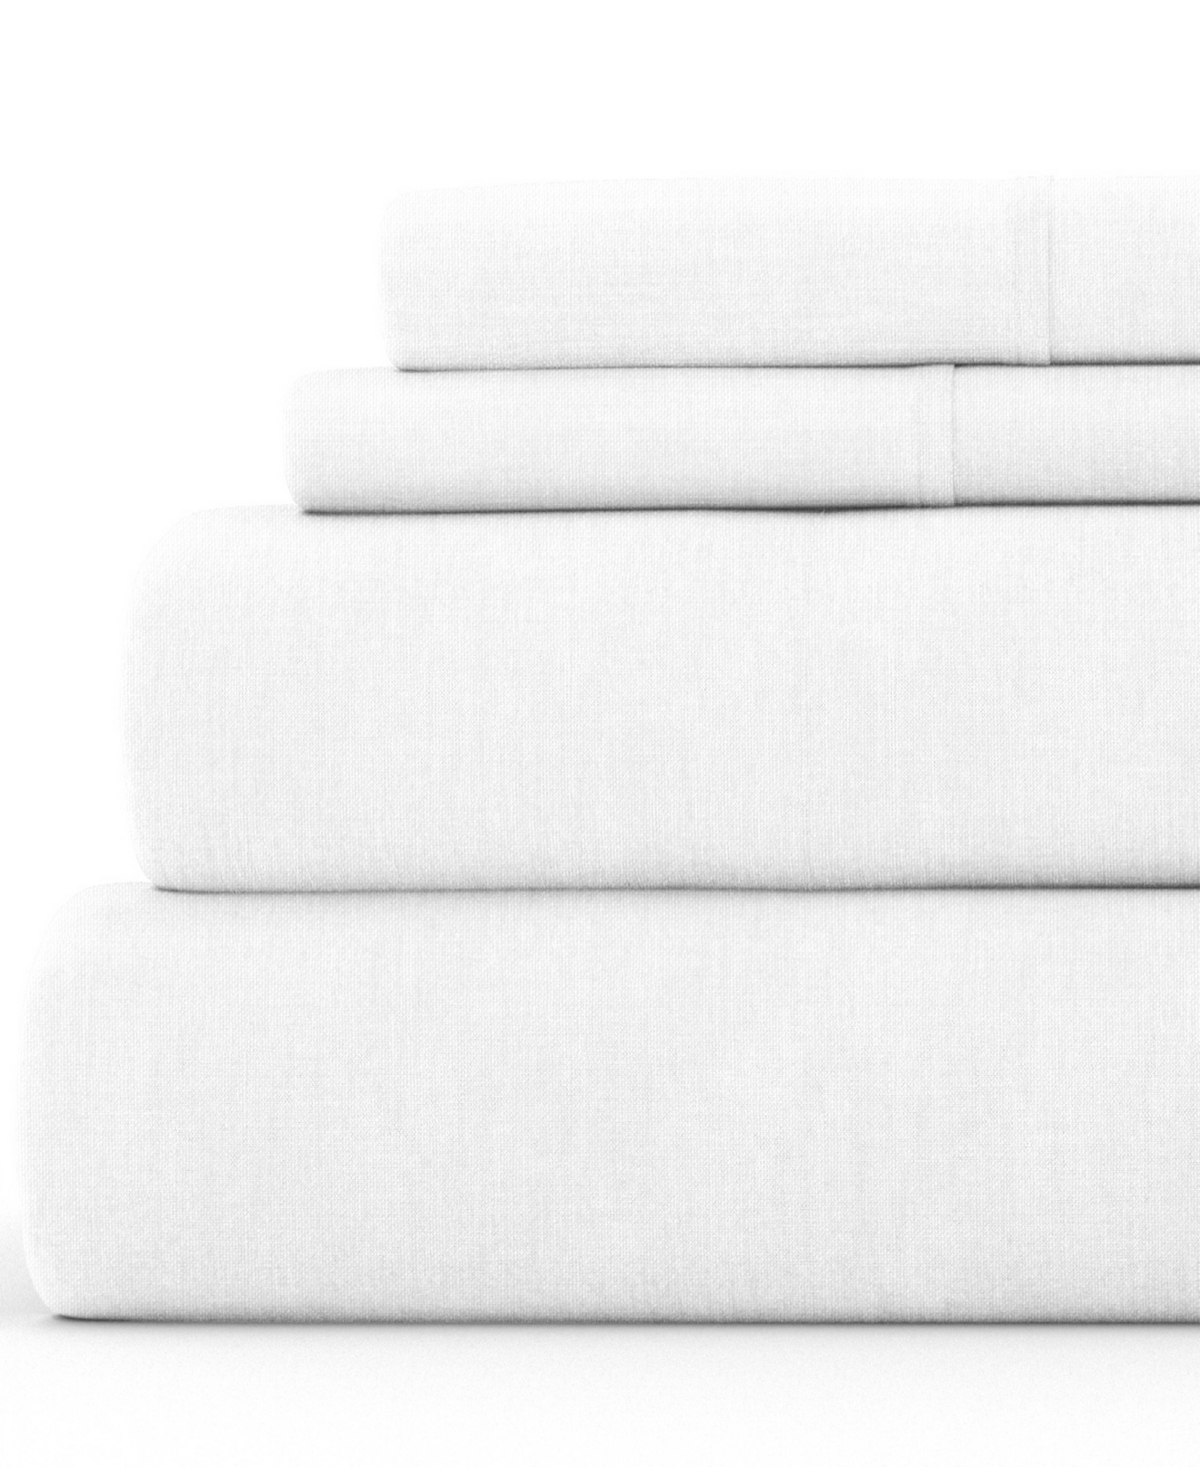 Ienjoy Home Collection Linen Rayon From Bamboo Blend Deep Pocket 300 Thread Count 3 Piece Sheet Set, In White